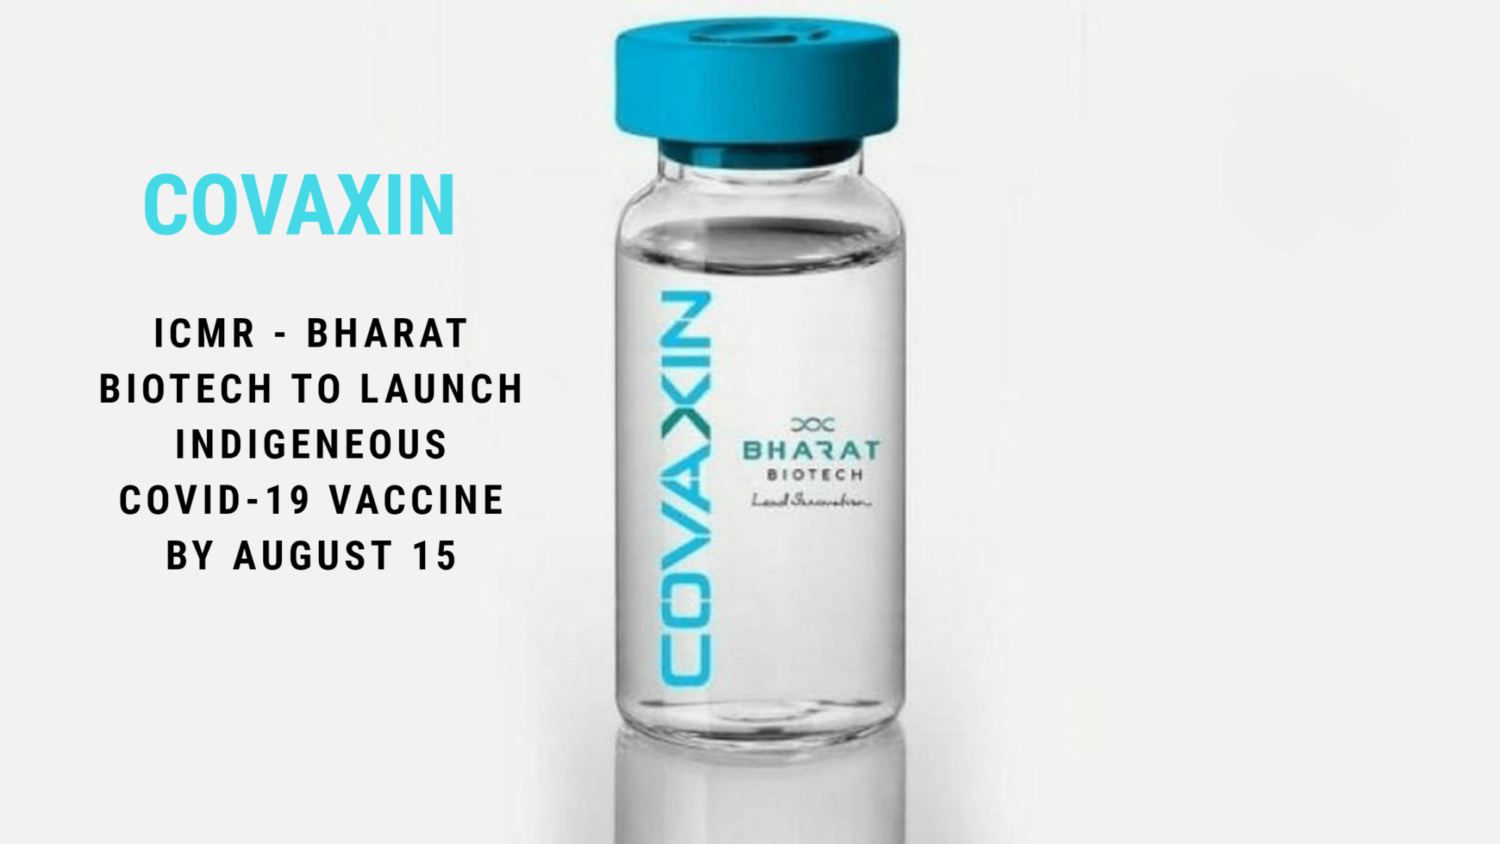 Image of Covaxin- corona vaccine developed by ICMR and BBharat Biotech